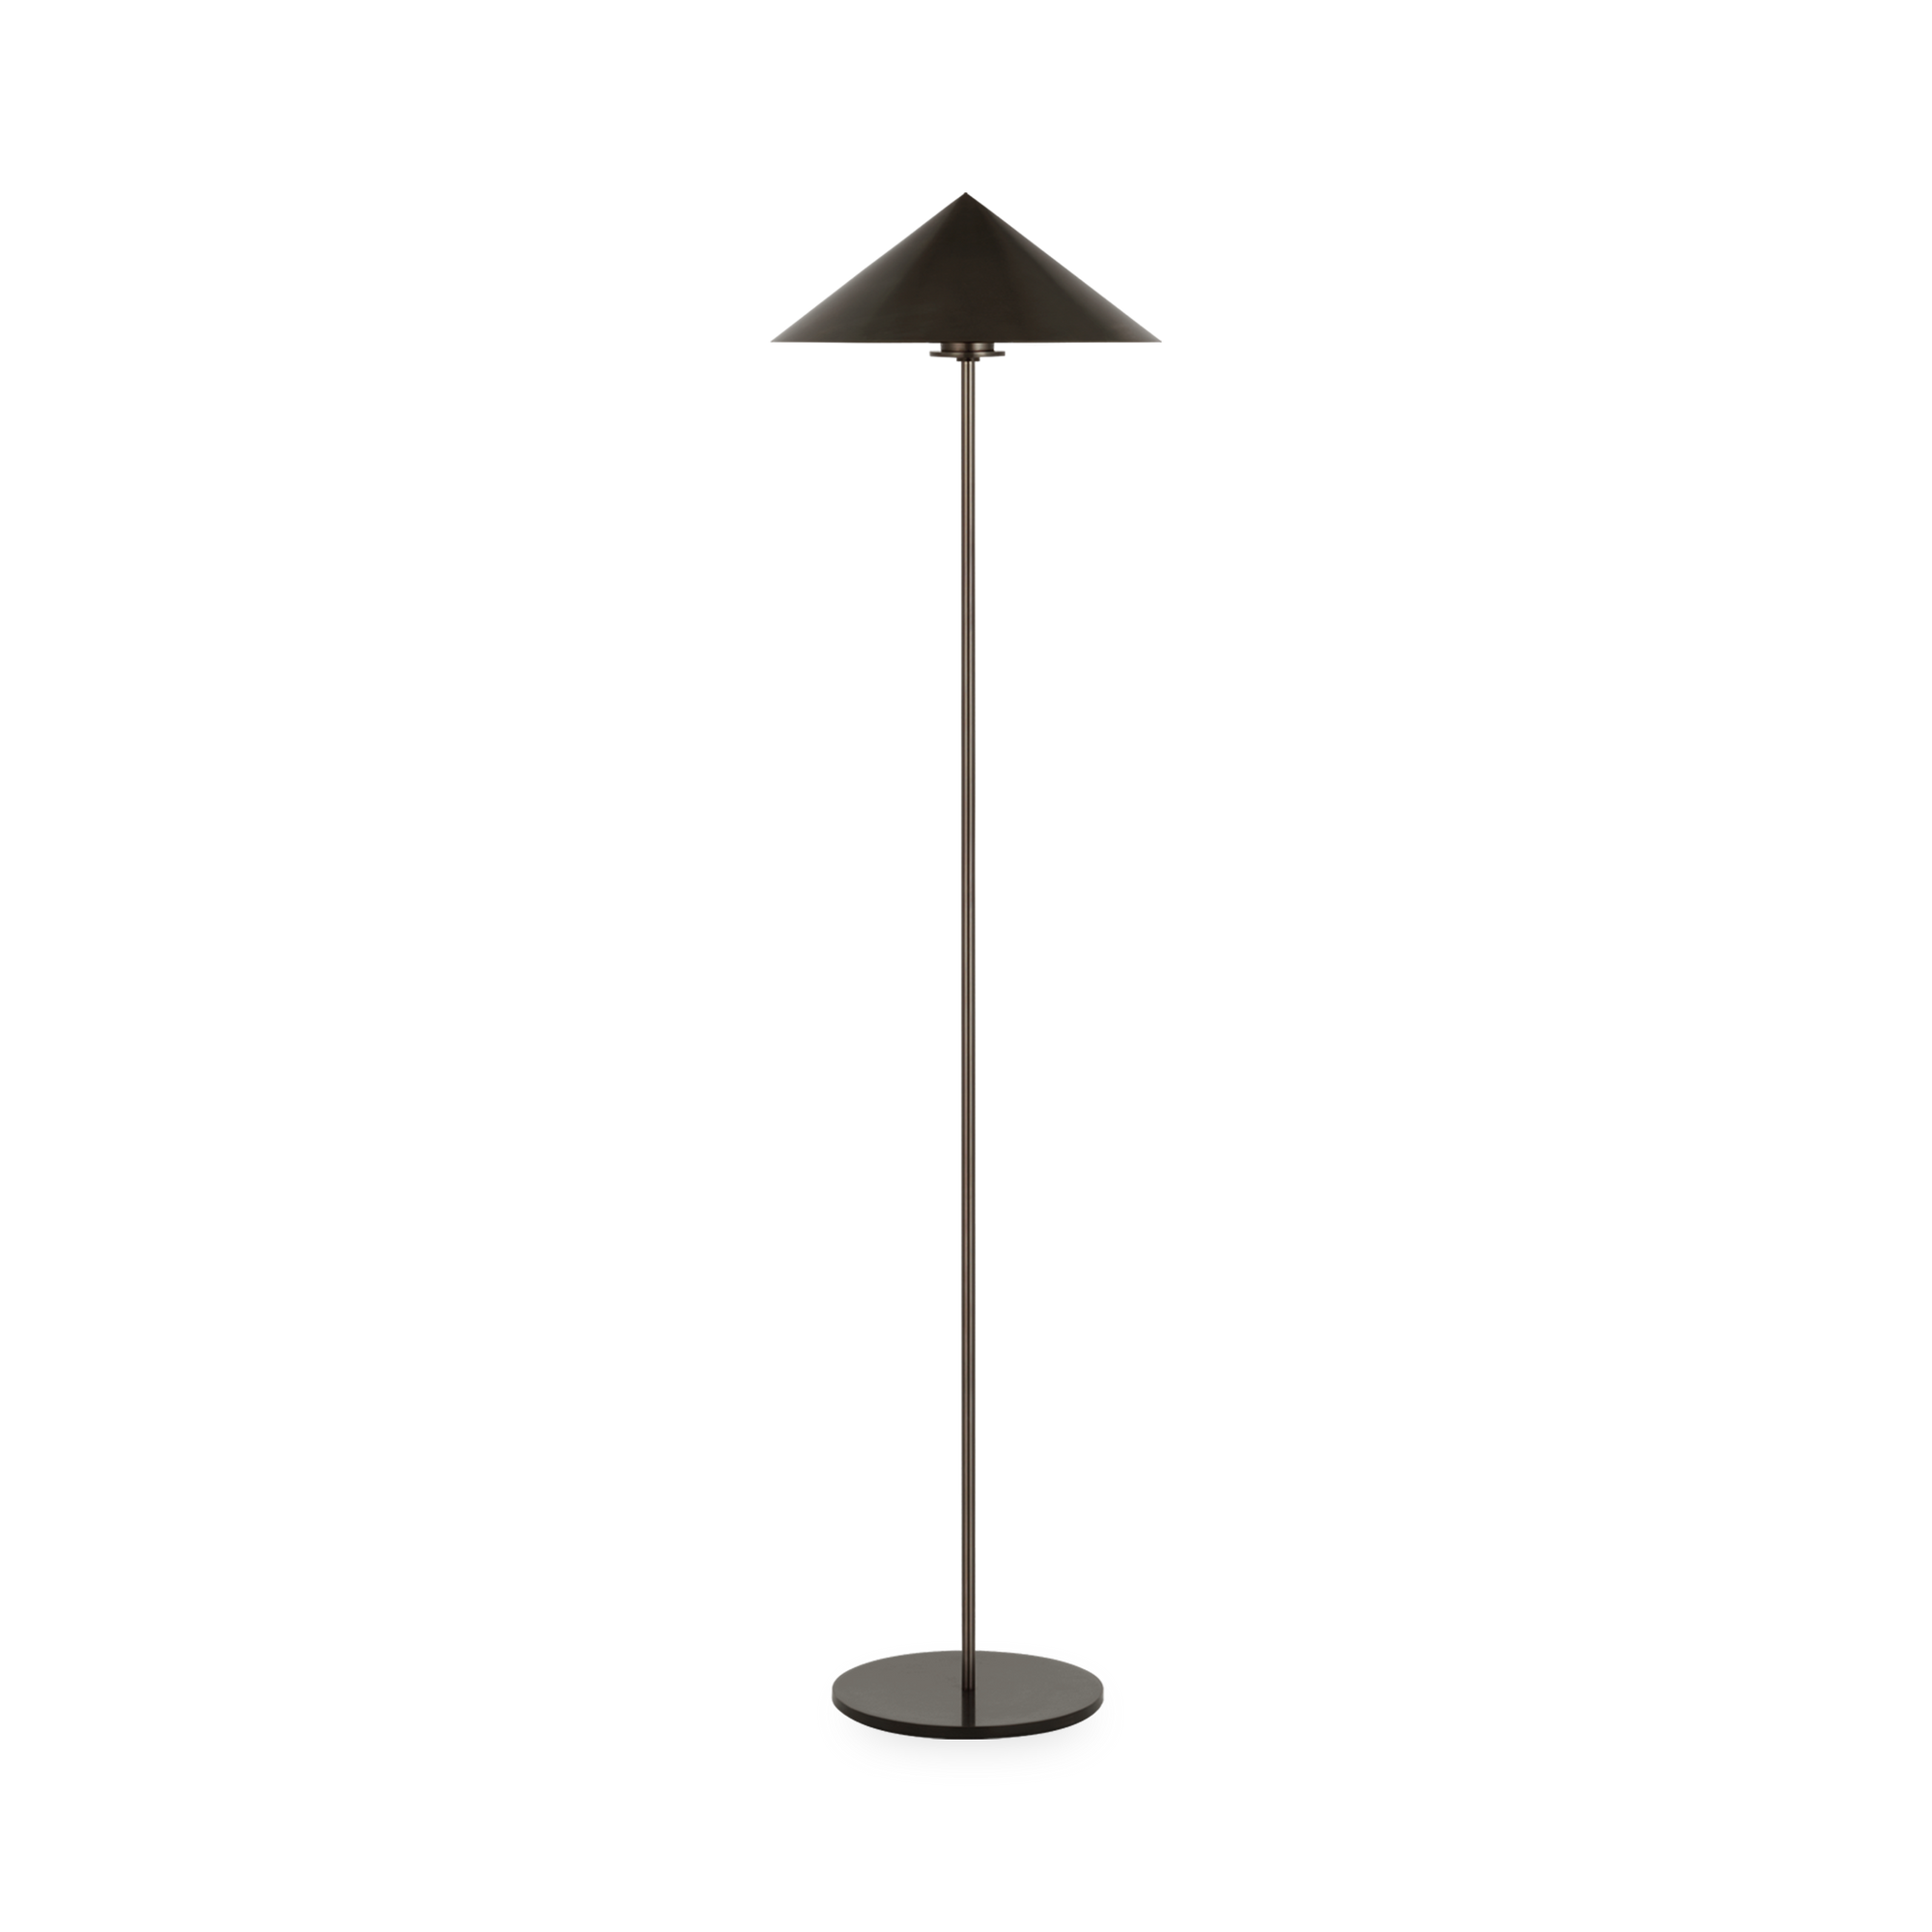 The Orsay Medium Floor Lamp is designed with a modern take on traditional style – gravitating towards a classic silhouette and timeless style paired with a touch of glamour and a